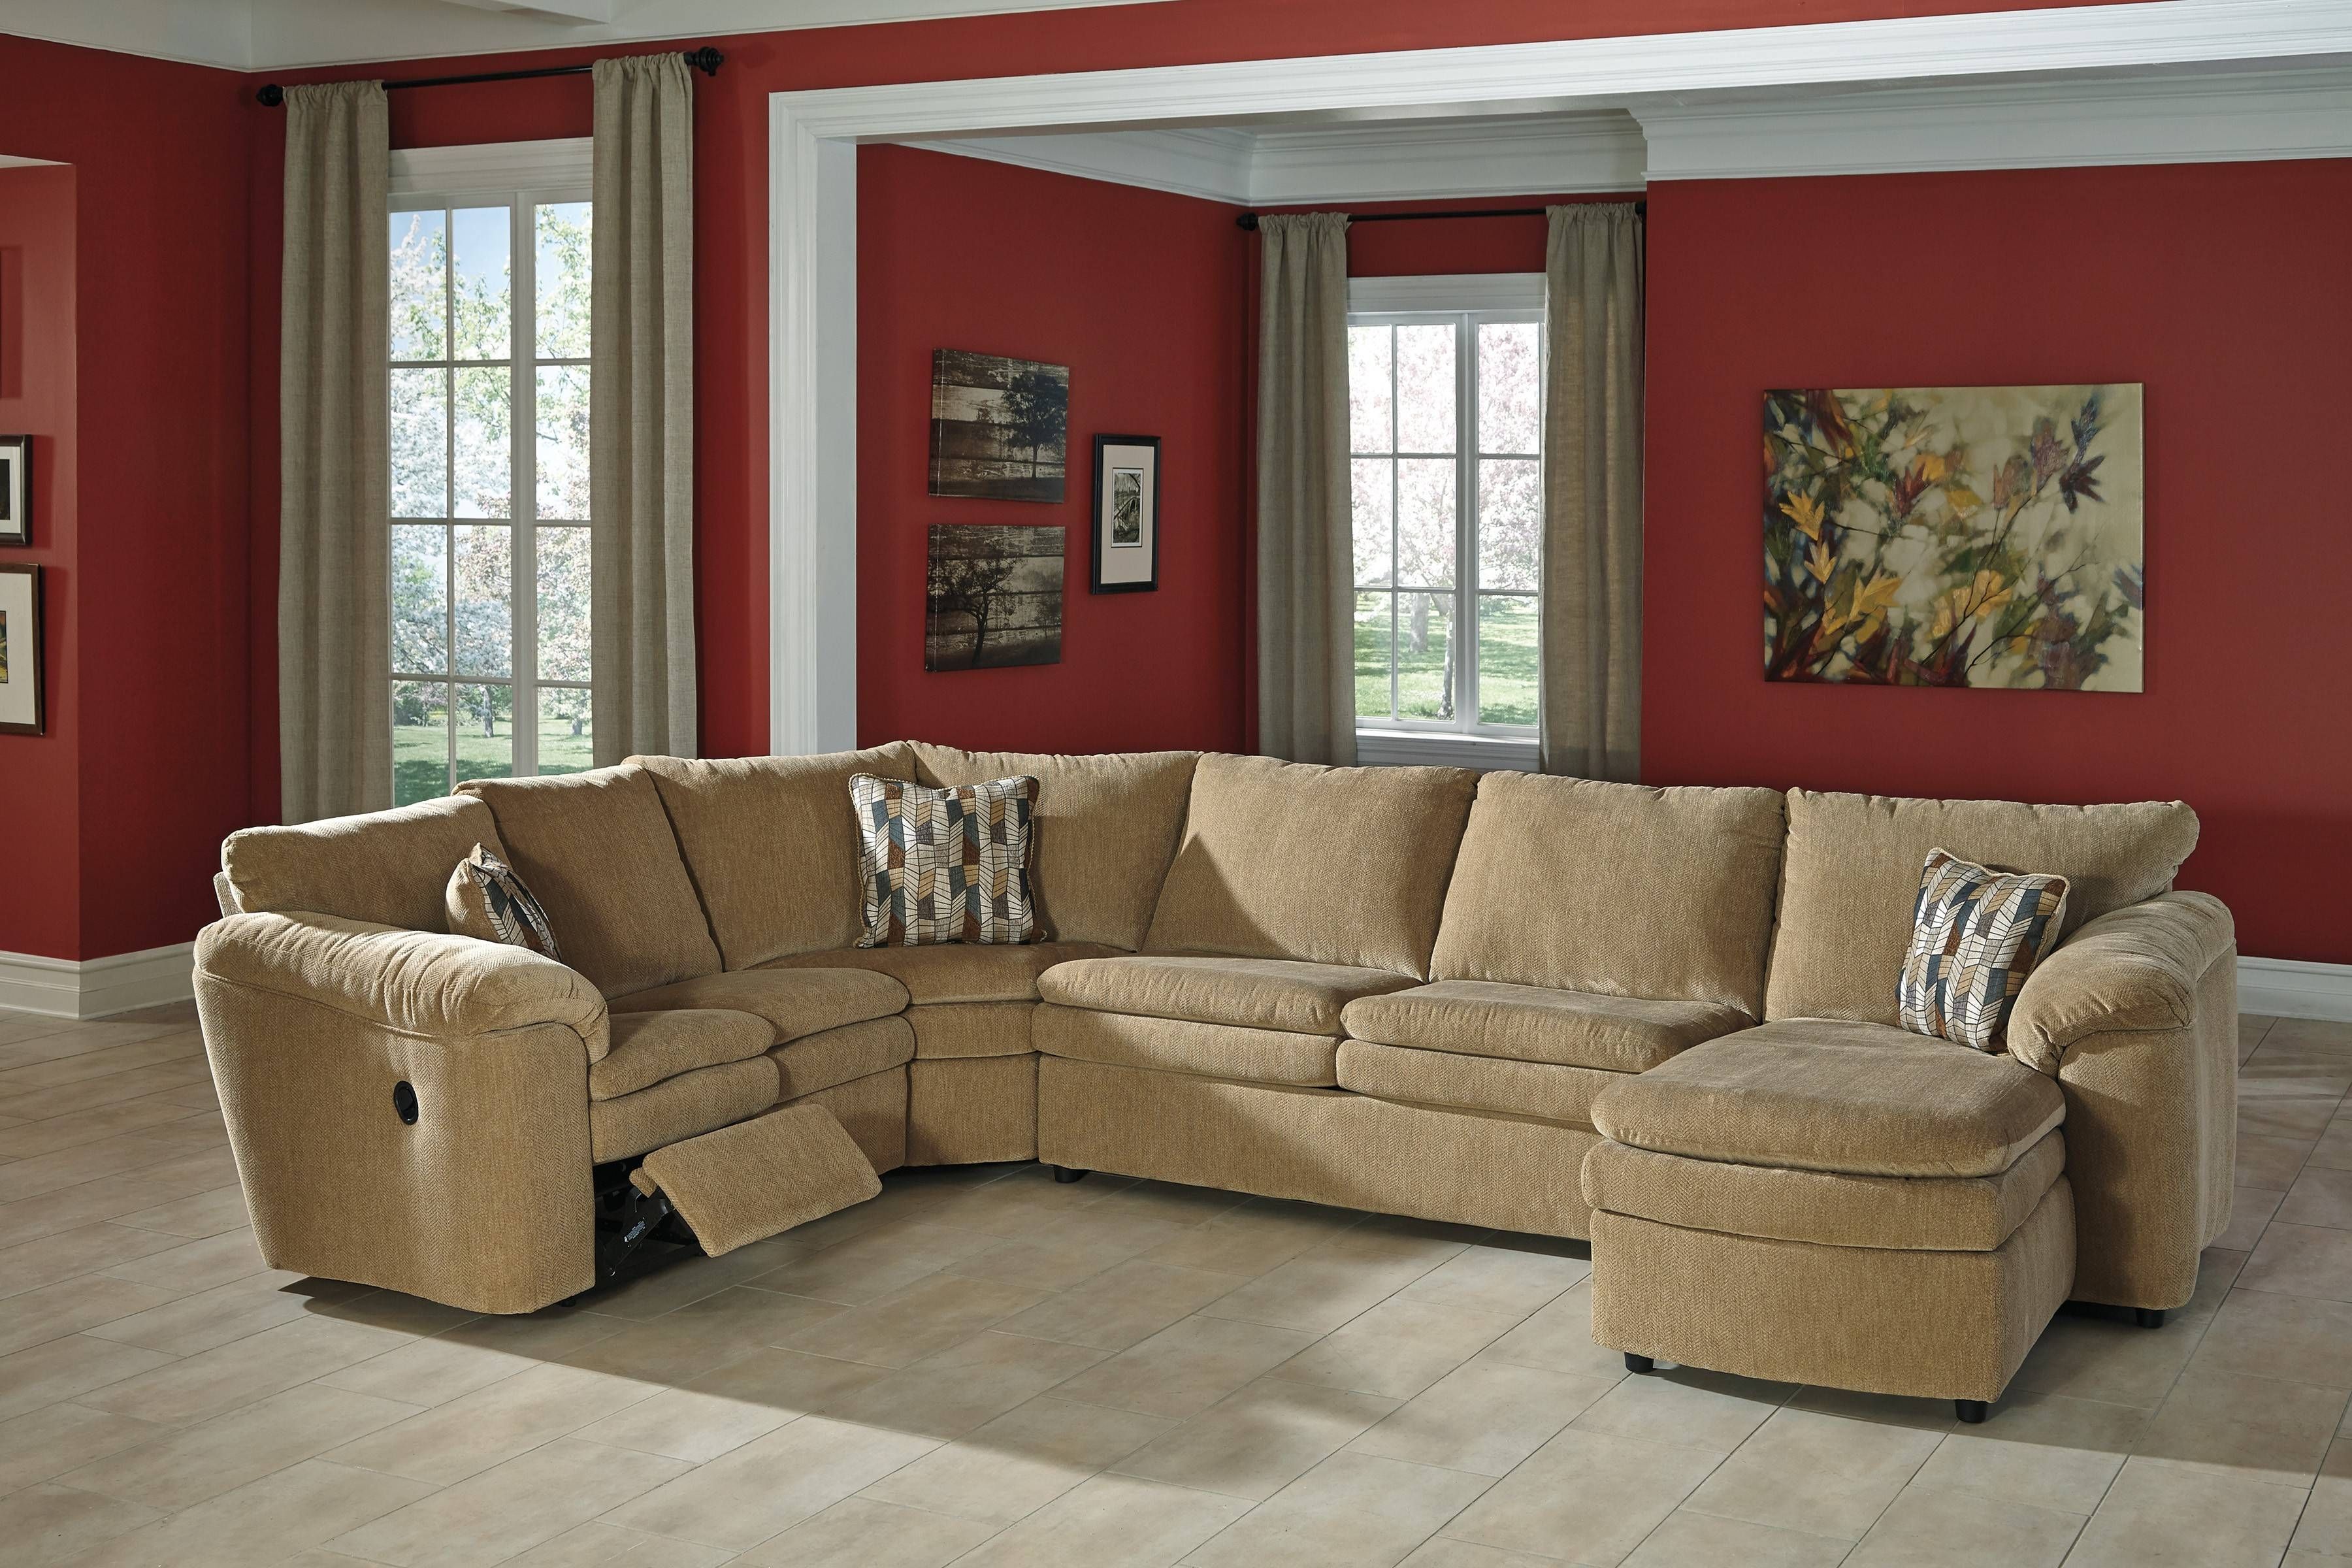 Decorating: Fill Your Living Room With Elegant Ashley Furniture With Regard To Ashley Furniture Brown Corduroy Sectional Sofas (View 4 of 15)